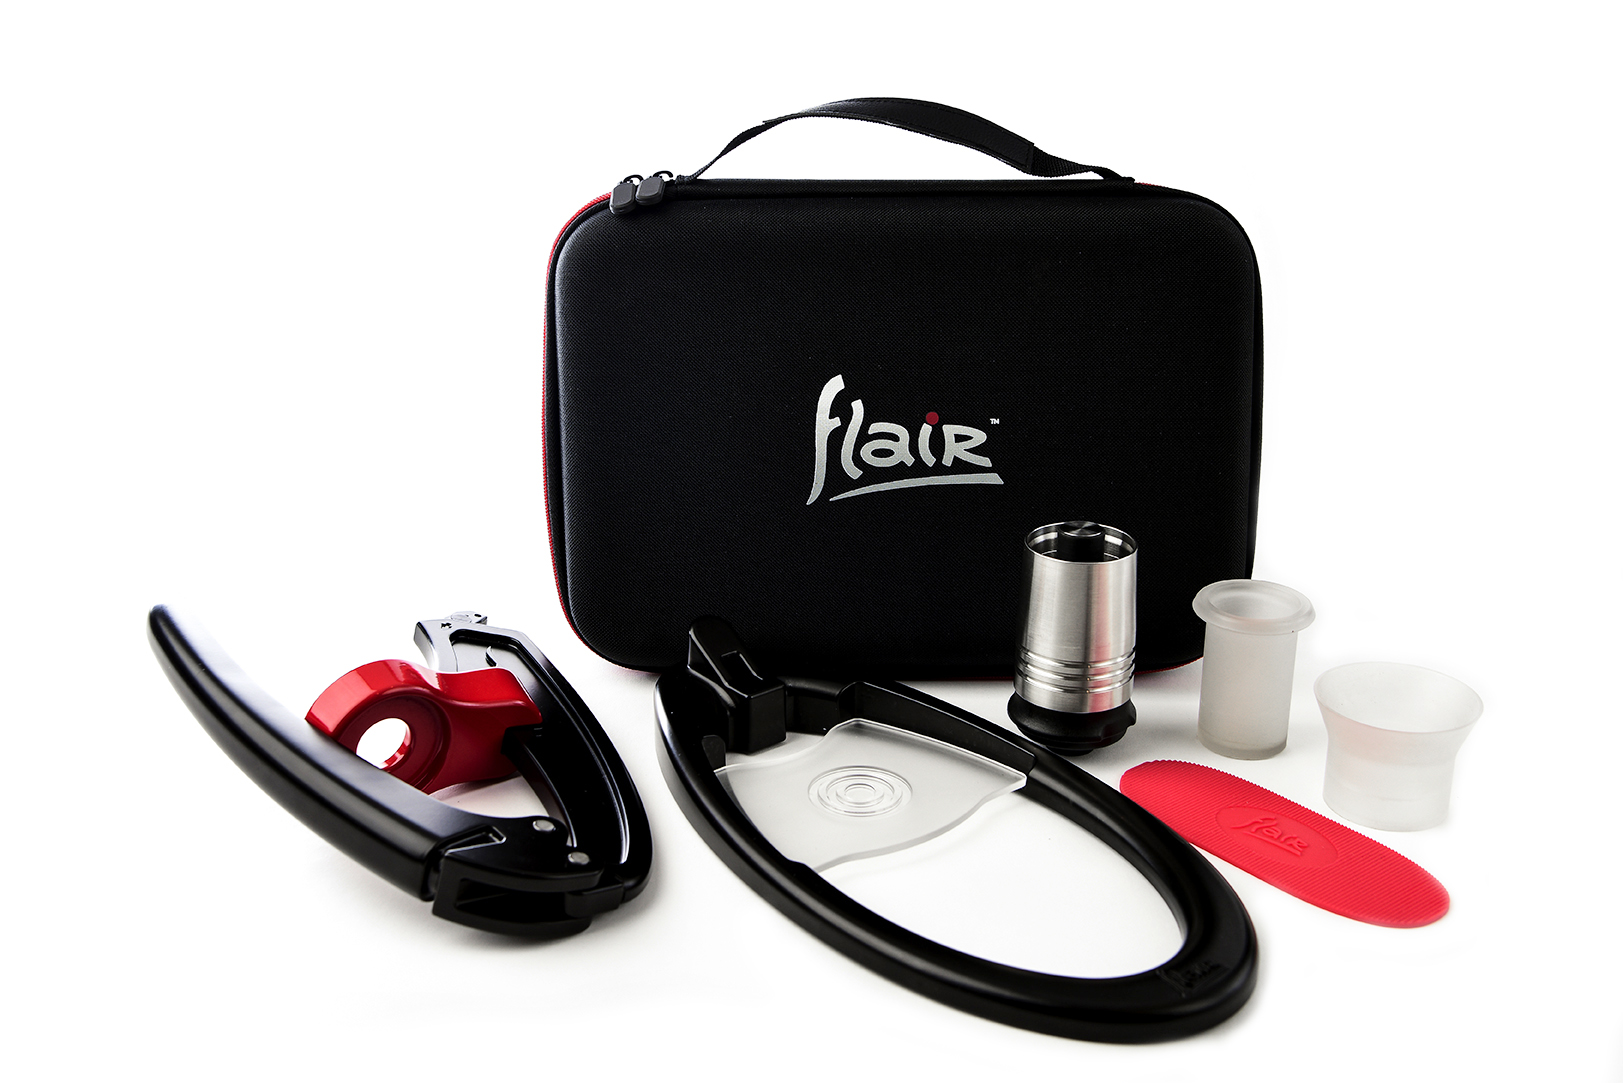 Flair Bundle Set (includes 2 Brewing Heads + Stainless Steel Tamper)